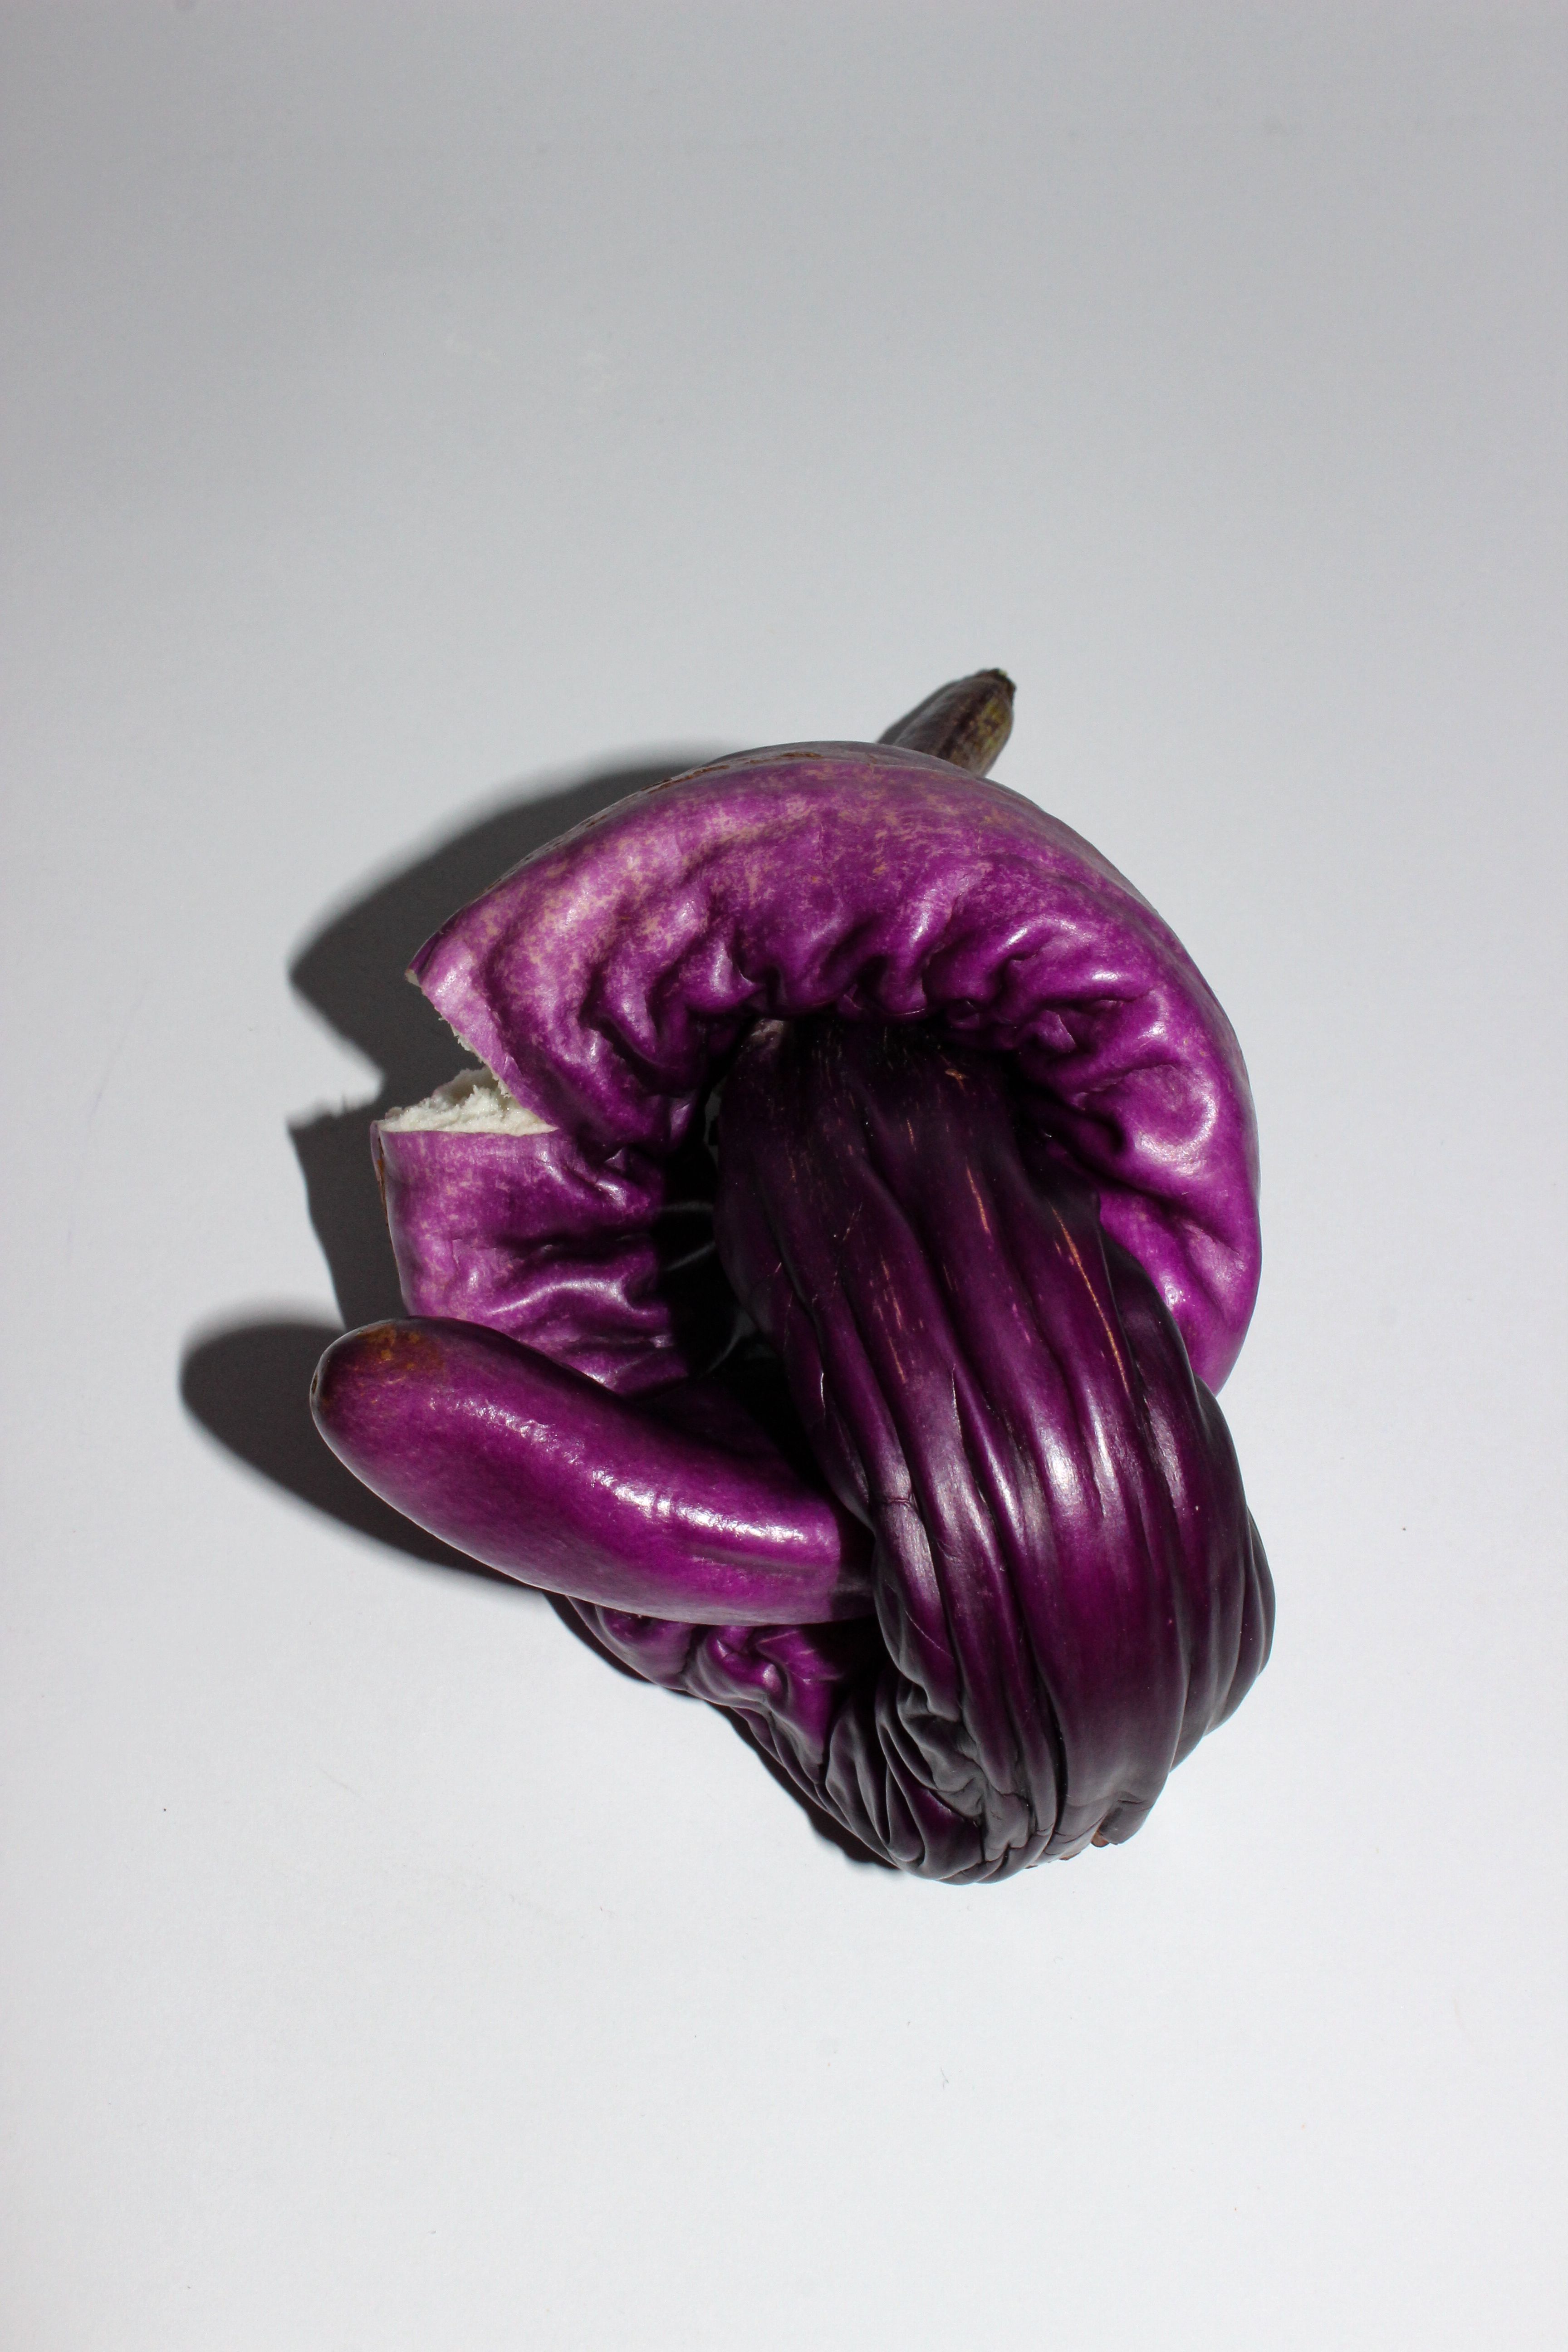 Half-dried aubergine twisted in itself